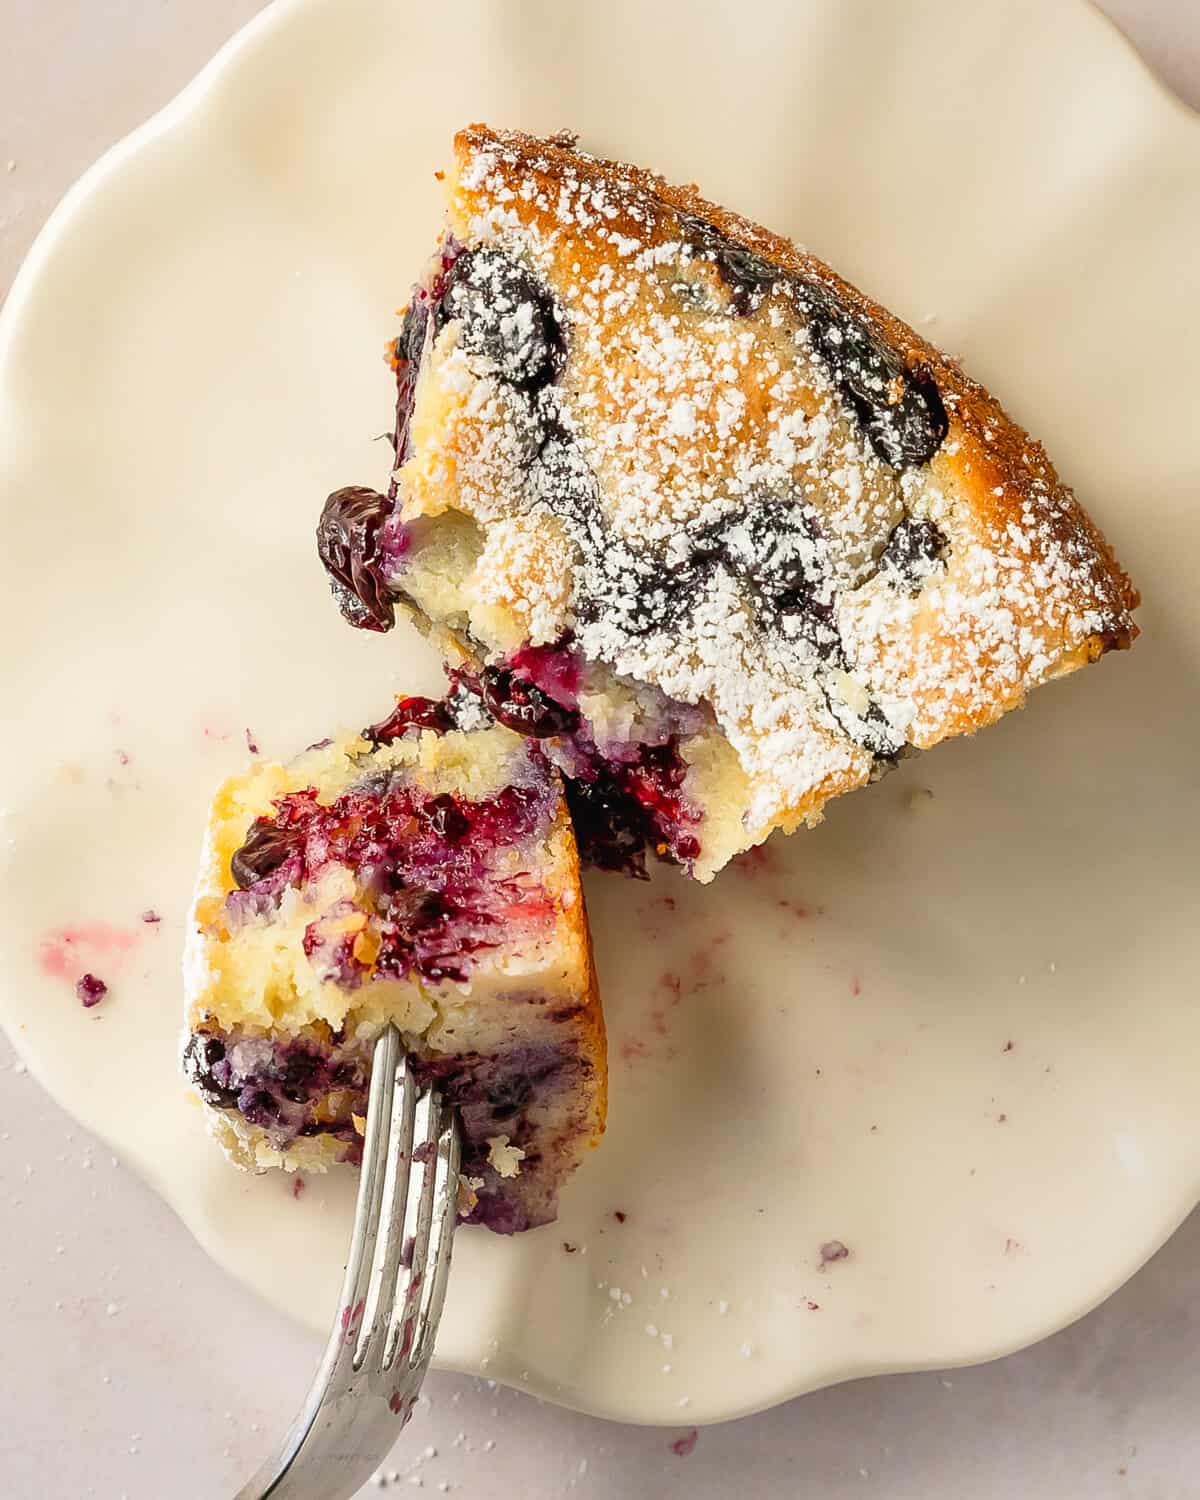 Blueberry ricotta cake is a deliciously sweet and moist Italian cake cake made with creamy ricotta and fresh blueberries. This easy to make blueberry lemon ricotta cake has a rich clafoutis like texture with a hint of bright lemon flavor. Make this ricotta blueberry cake for breakfast, dessert or anytime you need a simple, but stunning Italian cake.